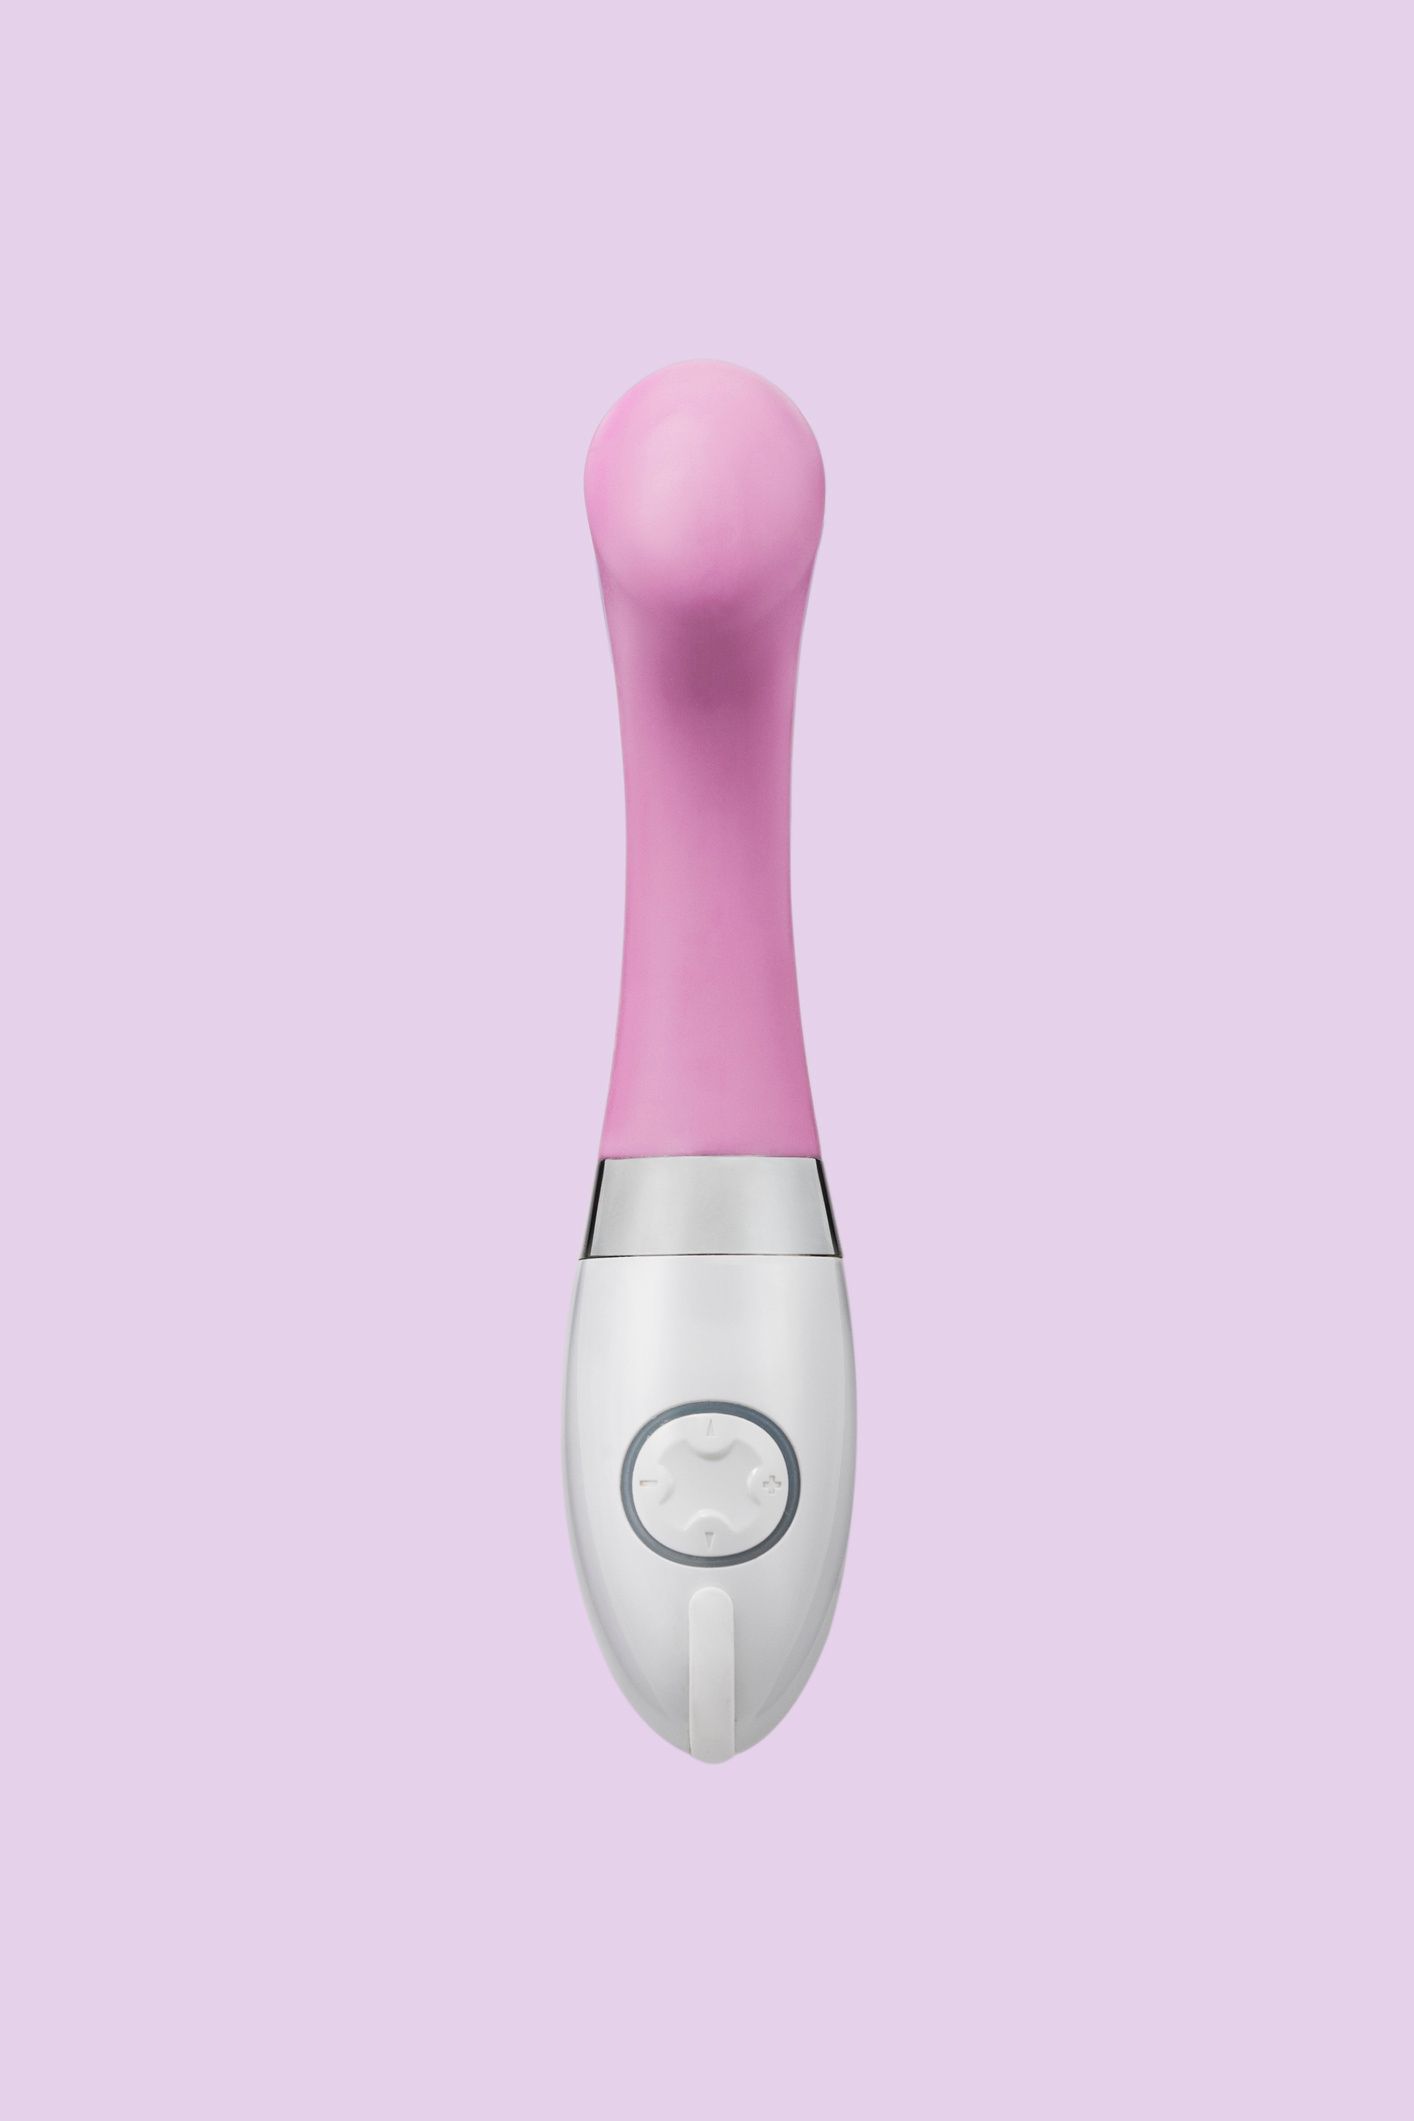 8 Adult Sex Toys Under picture